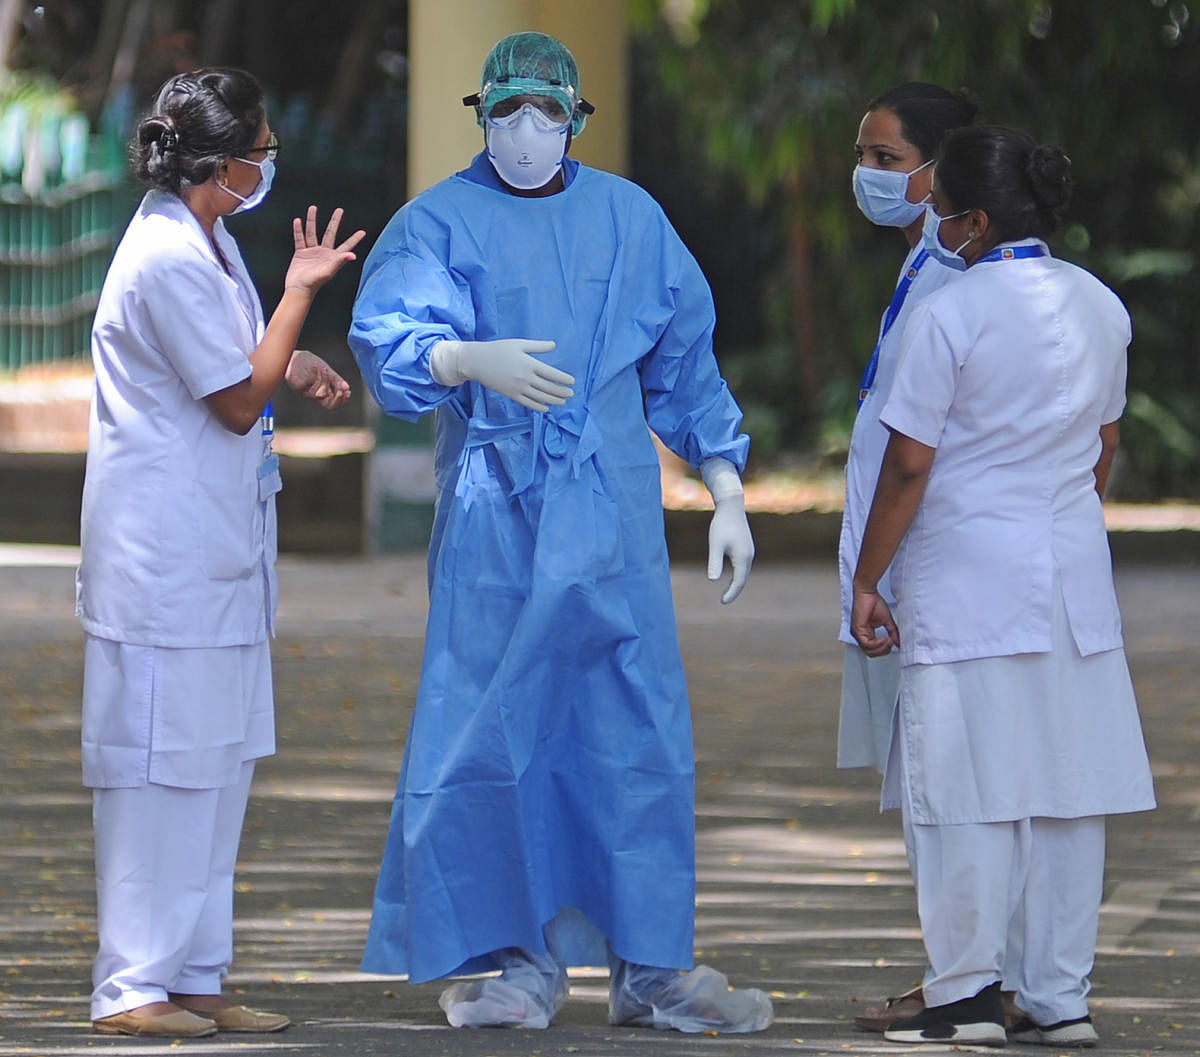 A medical staff with medical body suit interact with other staff amid COVID-19 outbreak (DH Photo)